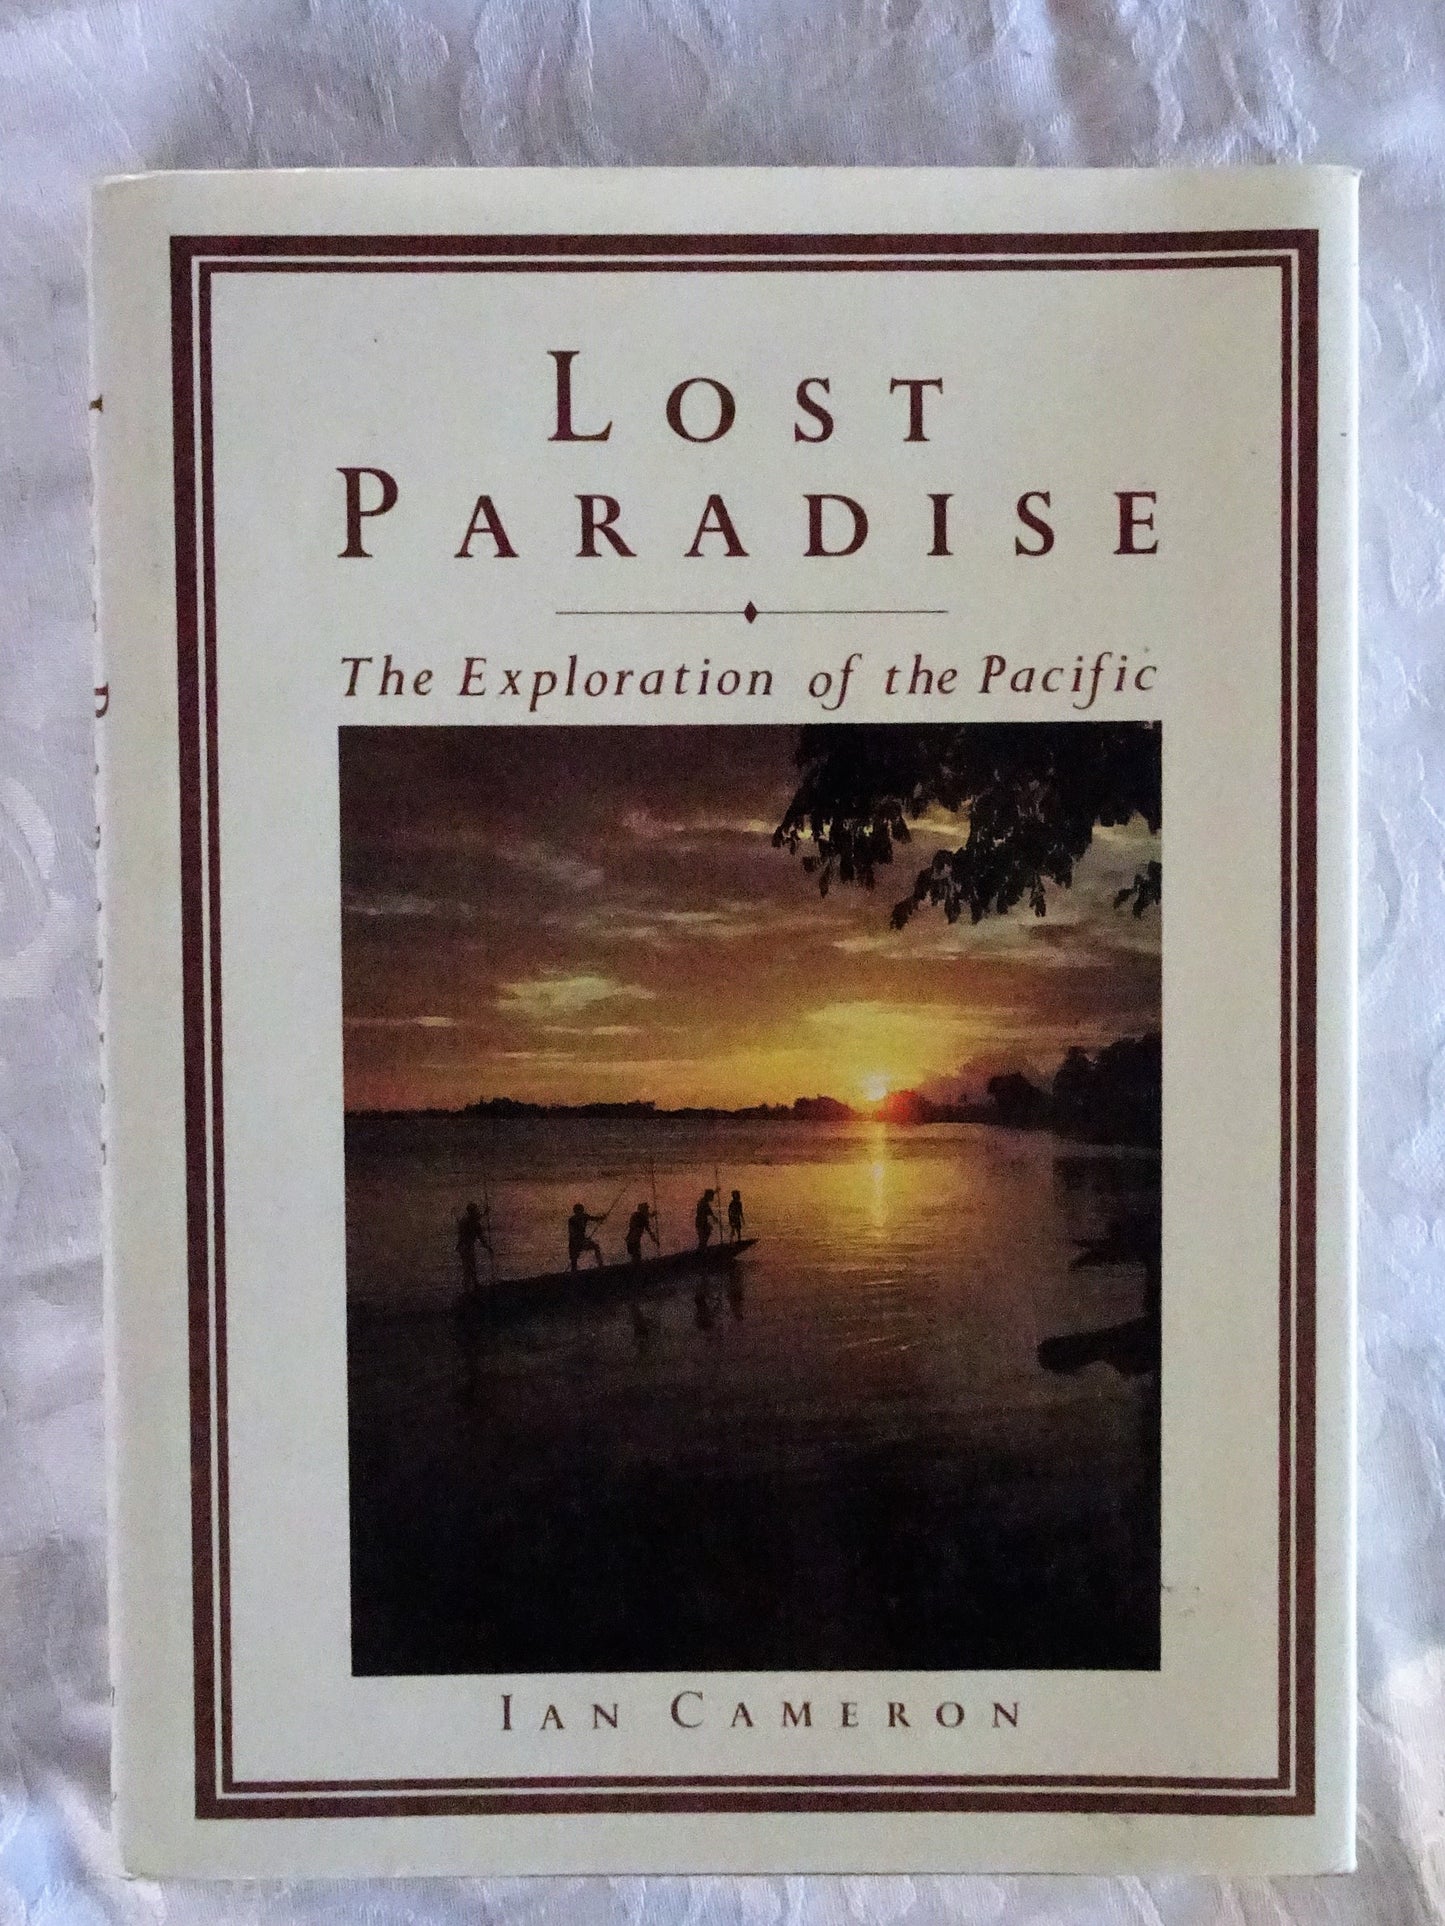 Lost Paradise by Ian Cameron